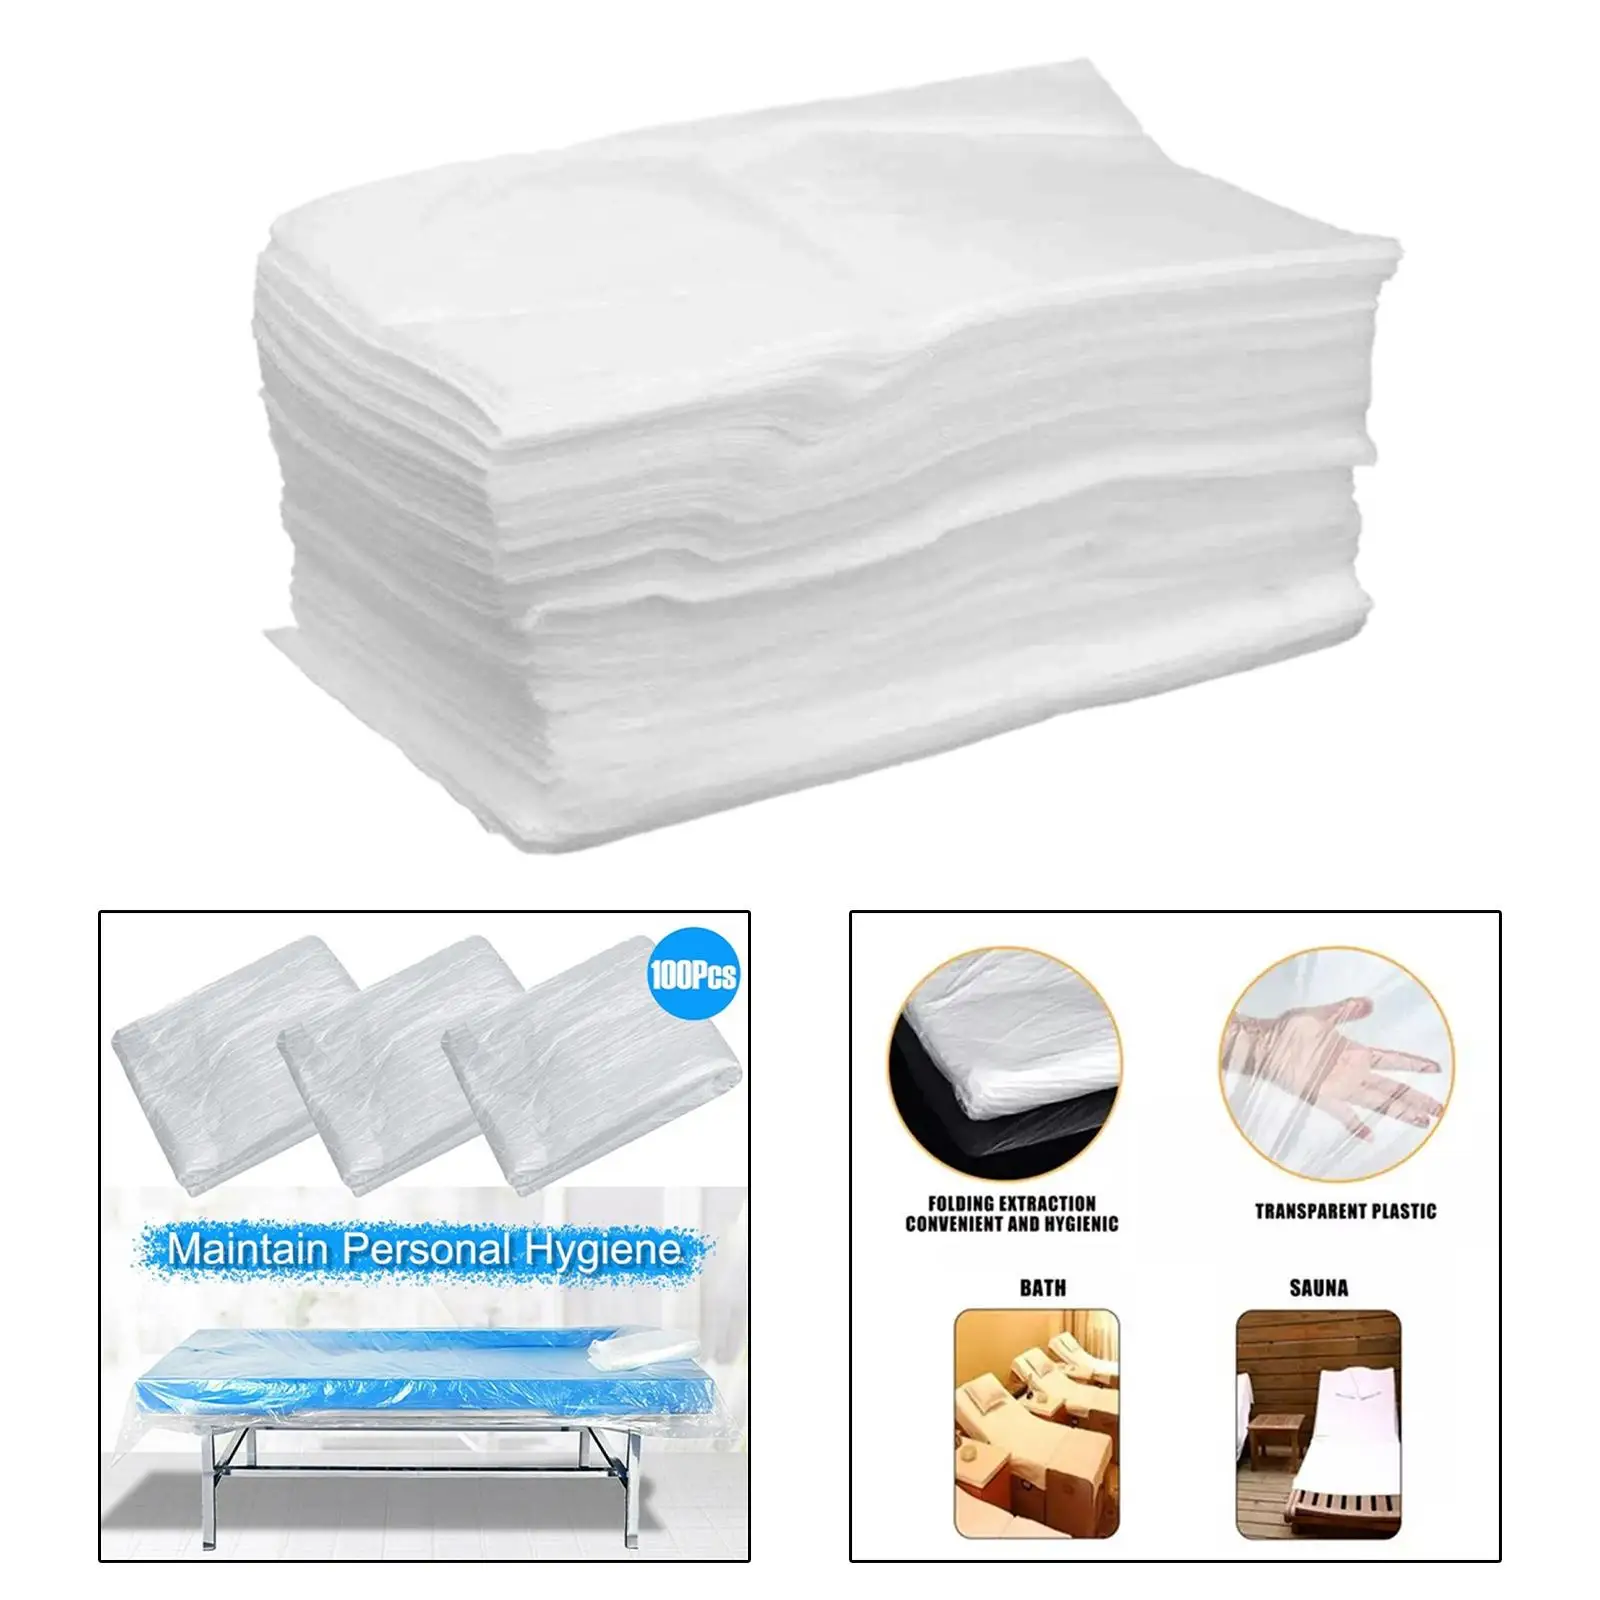 100 Pieces Disposable Massage Table Sheets SPA Bed Covers for Waxing Beauty Bed Hotels